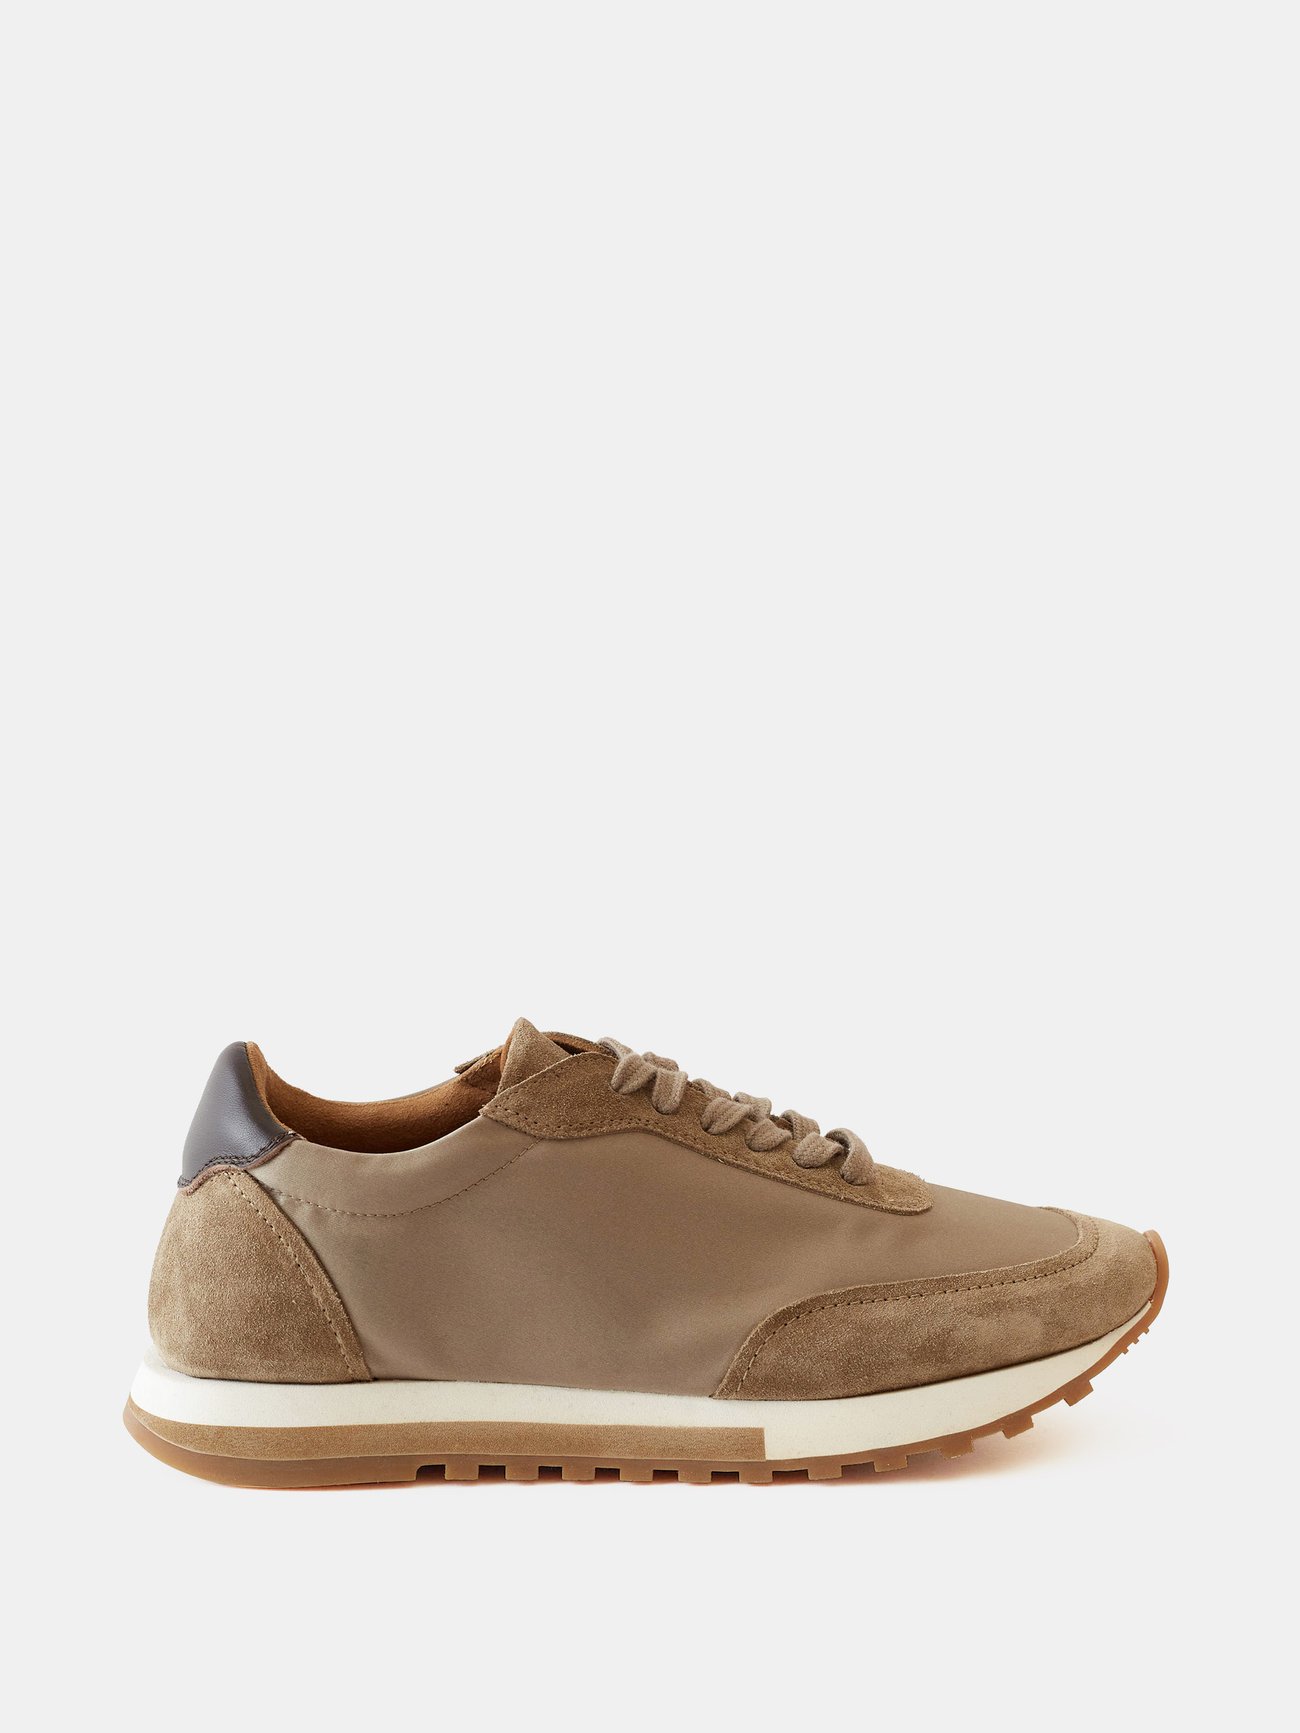 Beige Owen Runner suede and canvas trainers | The Row | MATCHES UK